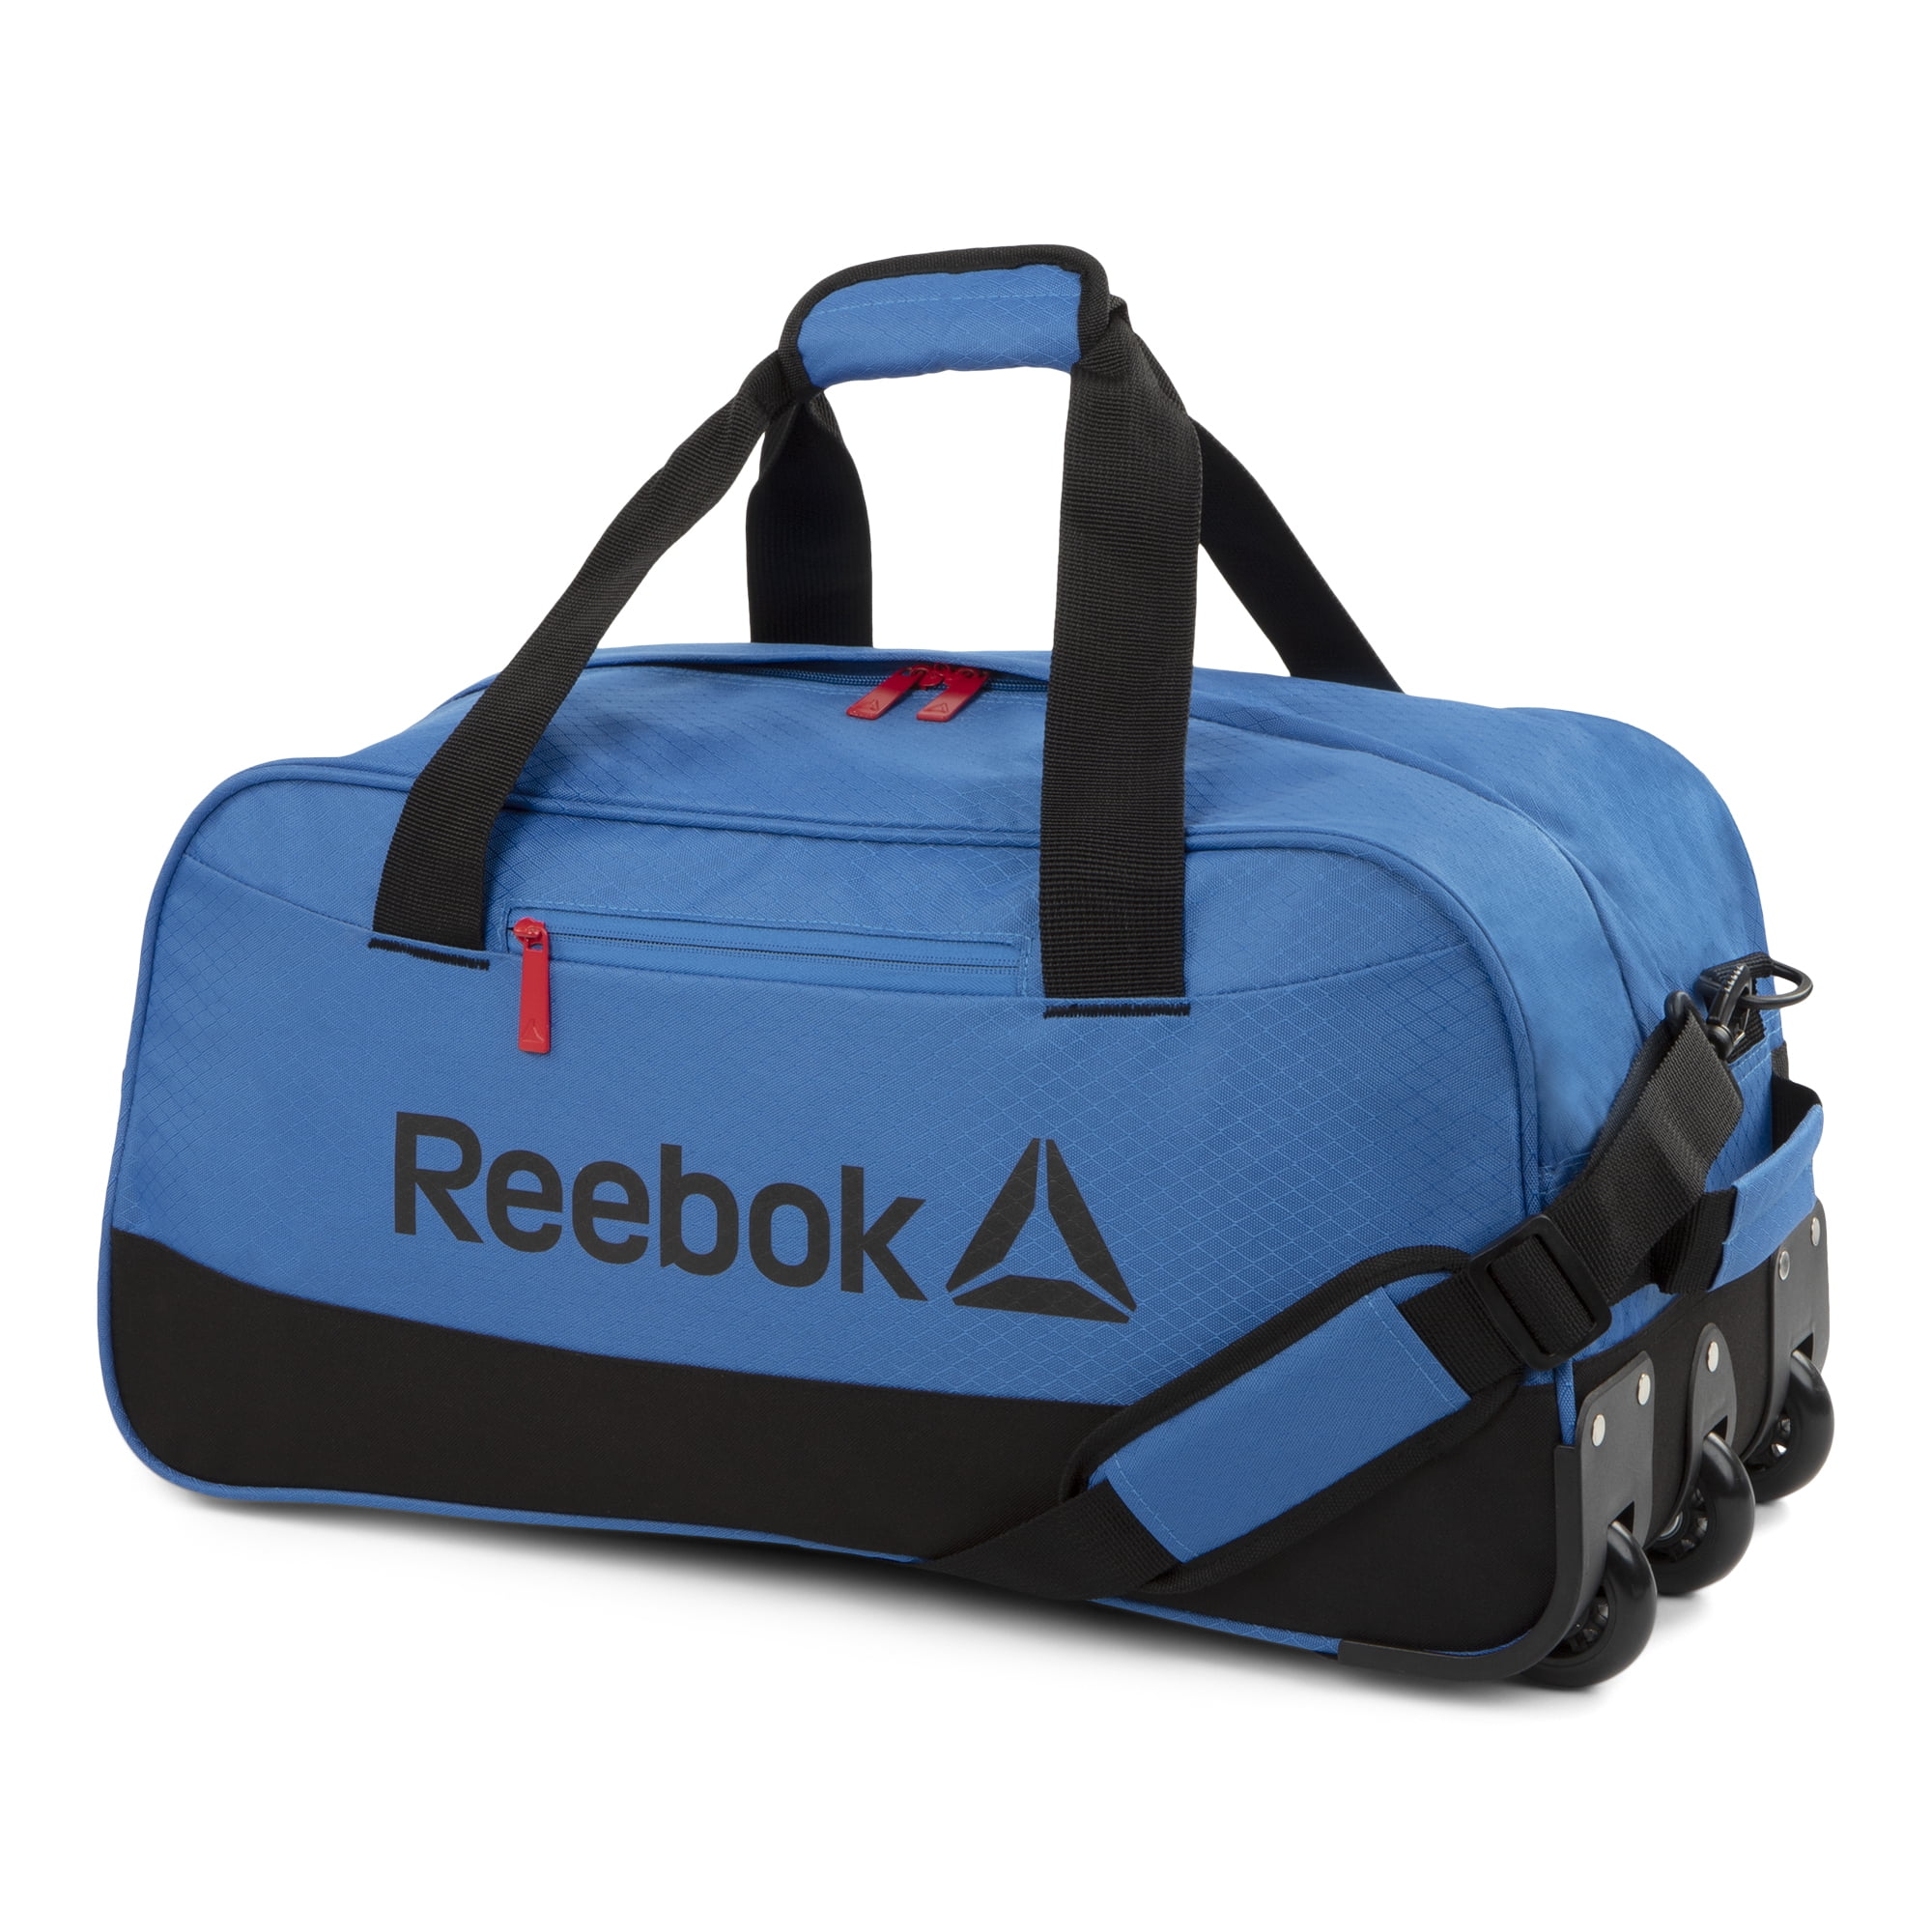 Reebok - Time Out Collection -Trolley duffle bag on wheels - Polyester ...